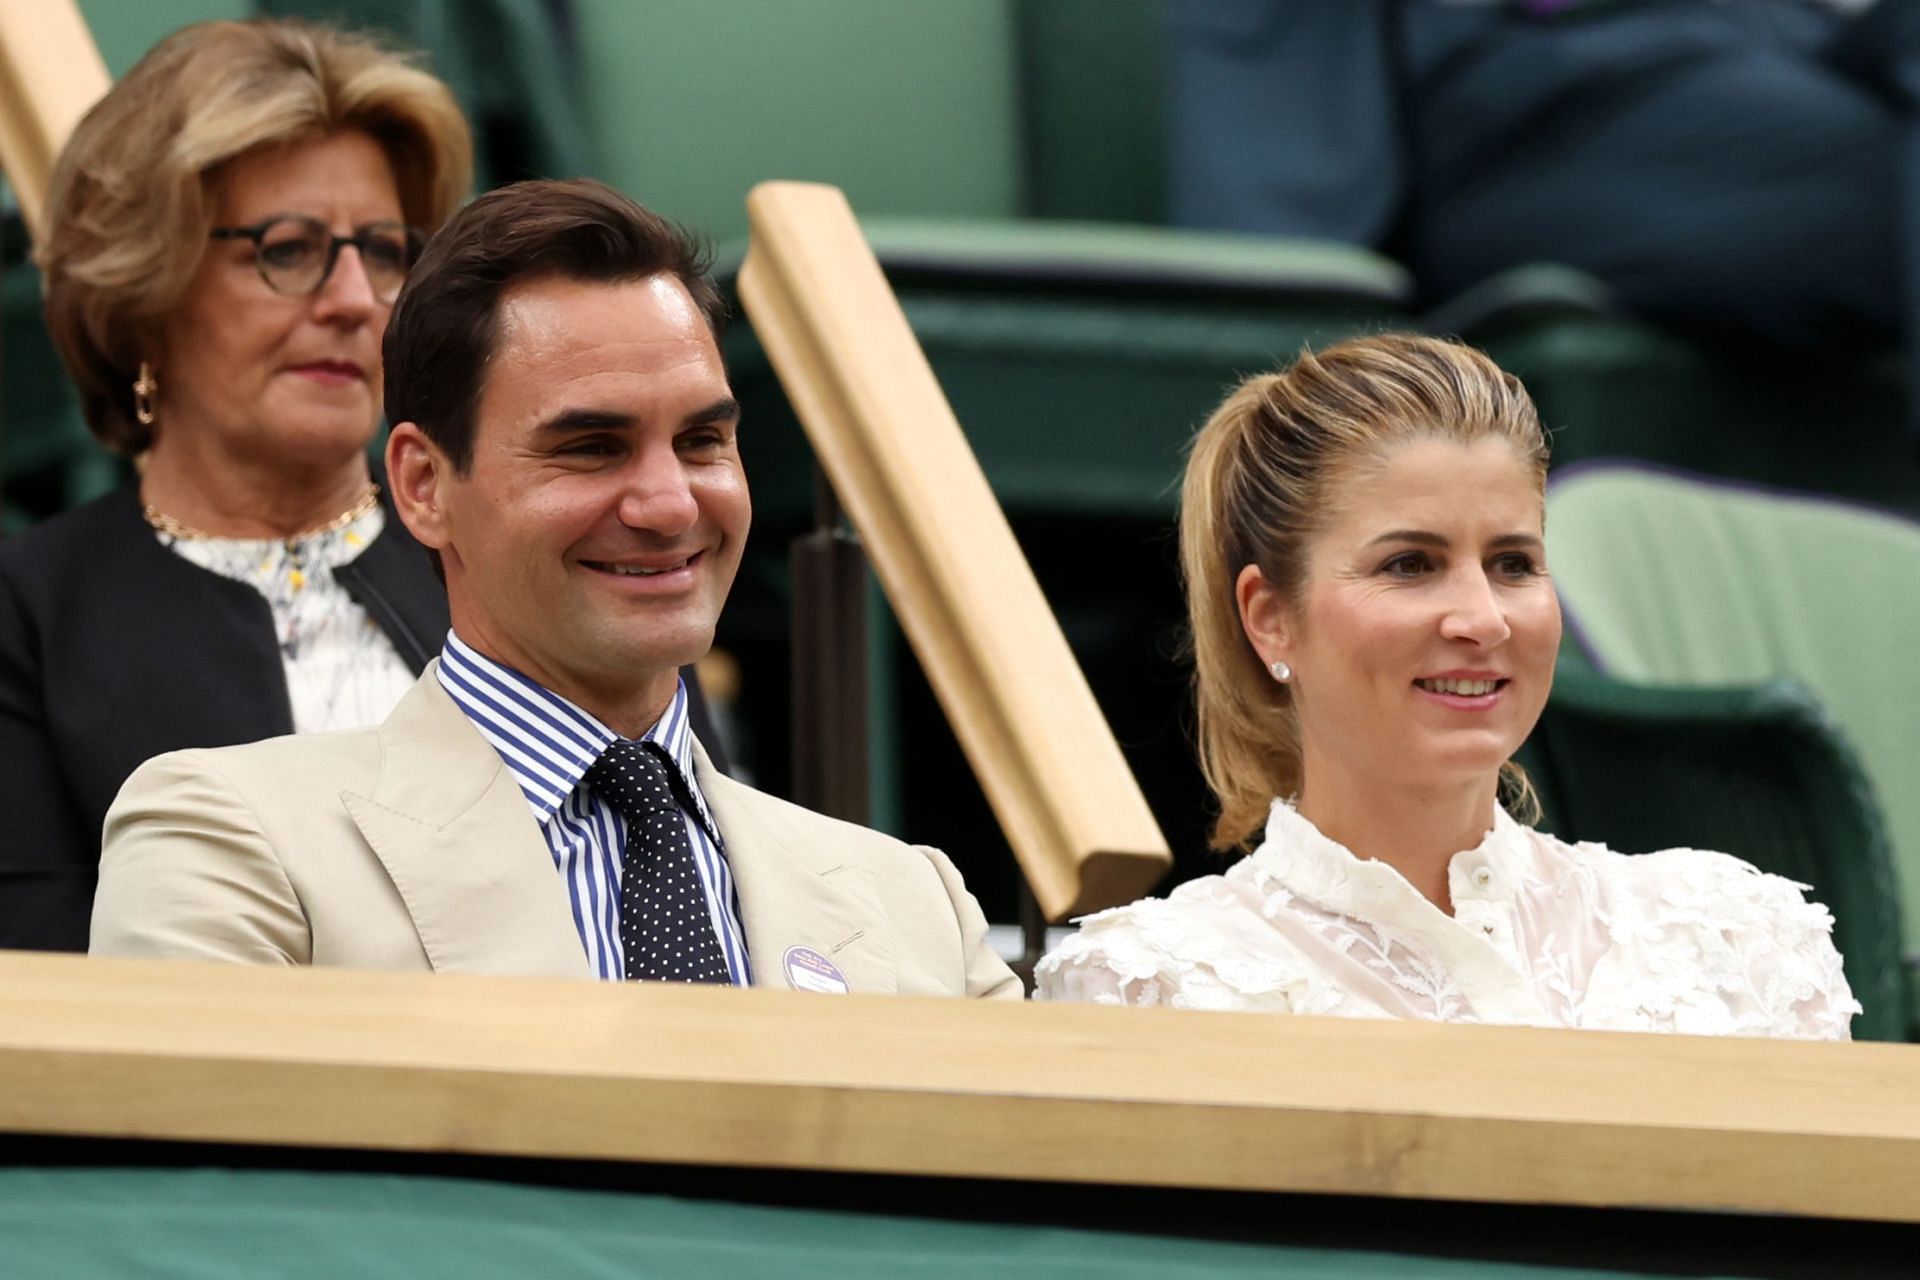 The Swiss maestro and his wife Mirka at the 2023 Wimbledon Championships